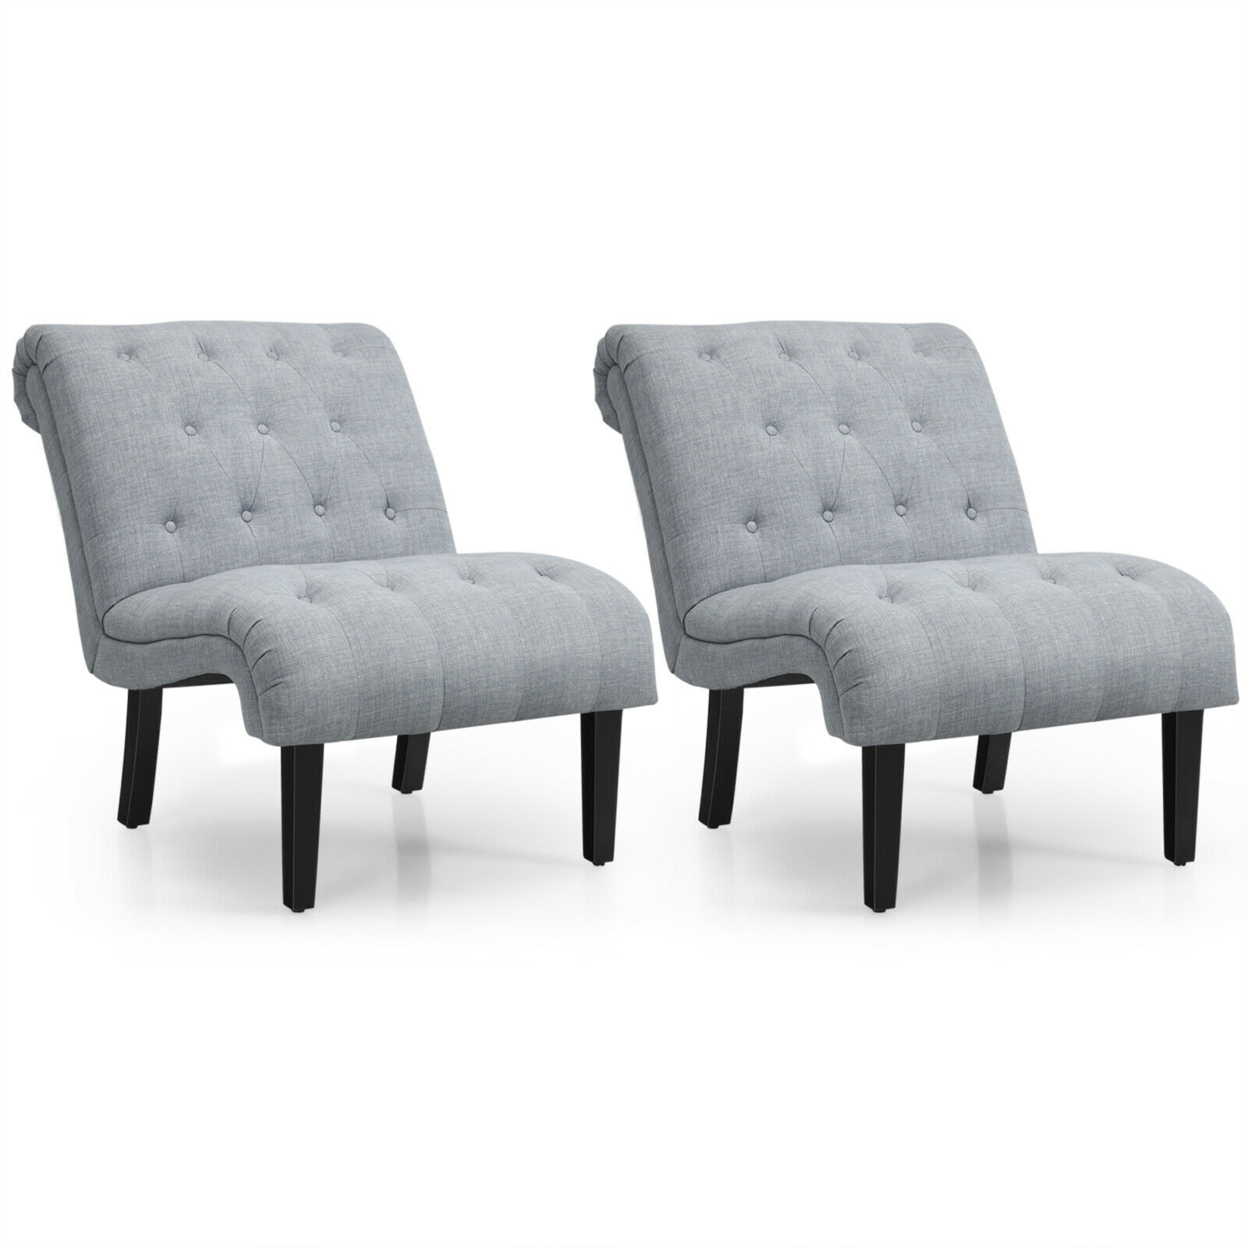 Set Of 2 Armless Accent Chair Upholstered Tufted Lounge Chair - Light Grey